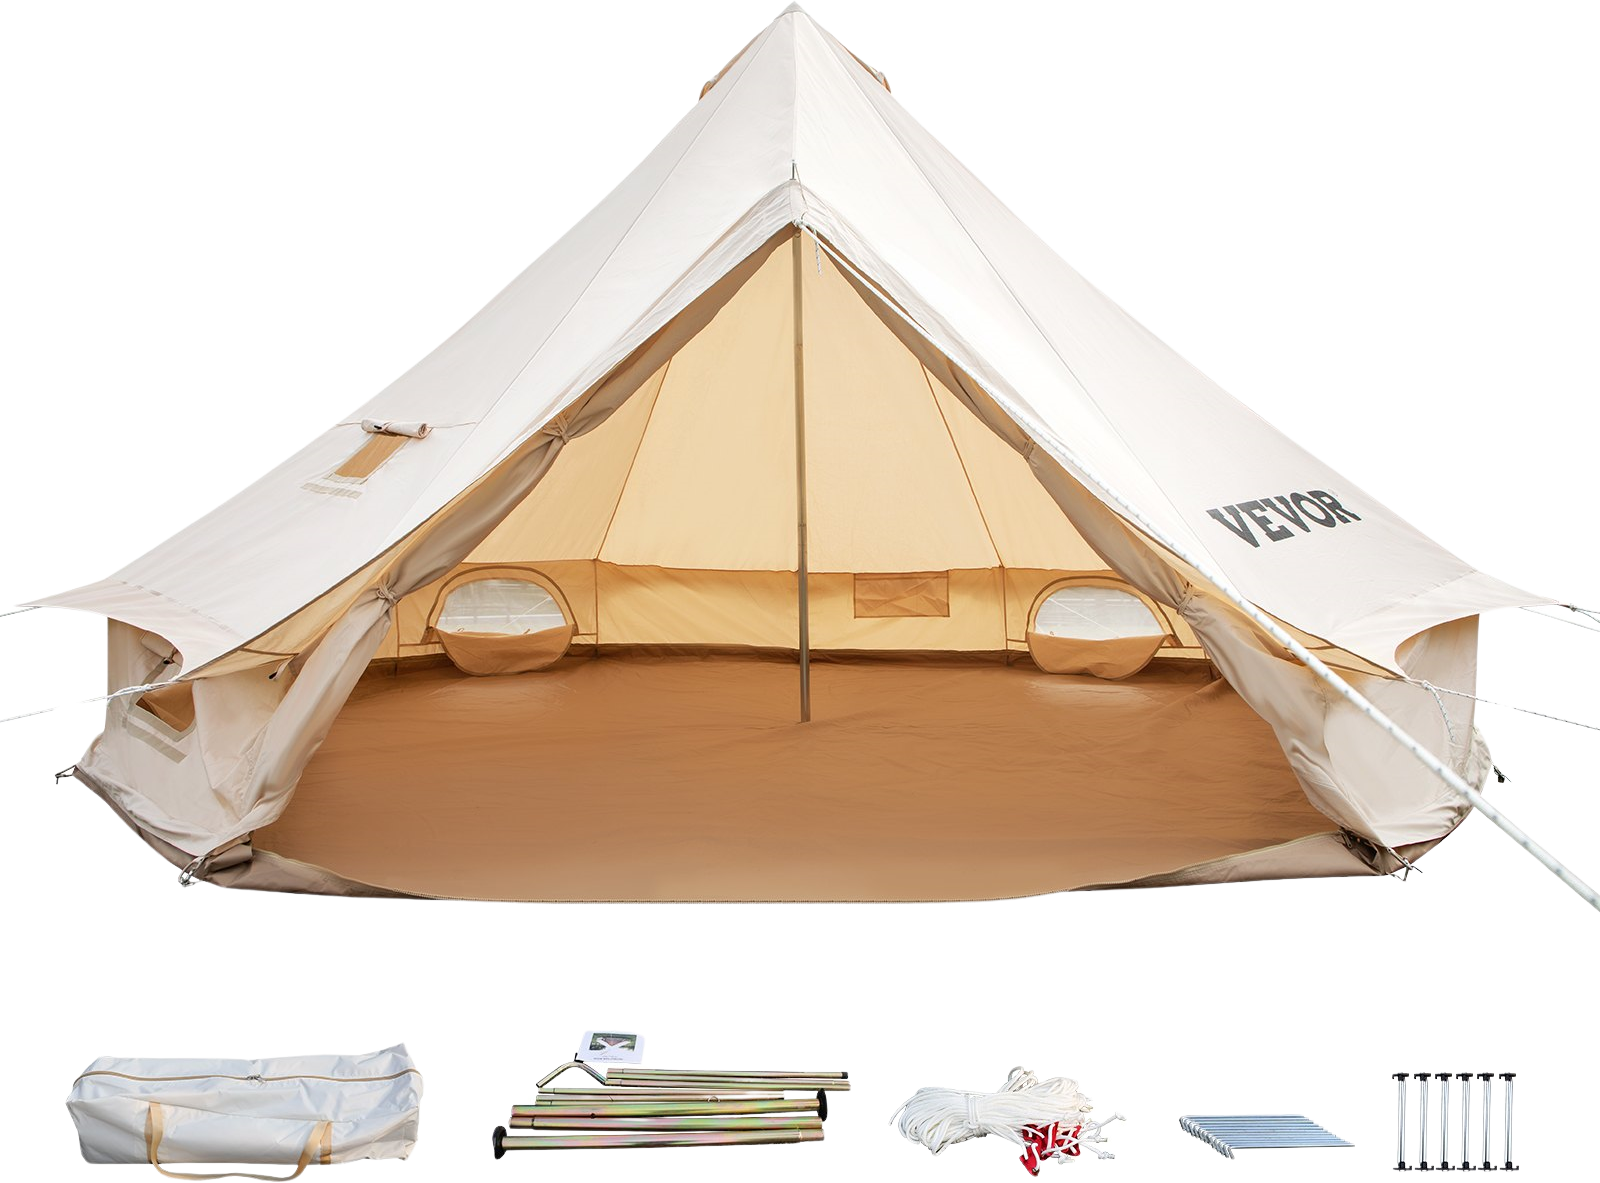 Vevor Bell Tent 19 ft/6m Yurt Cotton Canvas Waterproof With Stove Jack For 10-12 People 4 Seasons New